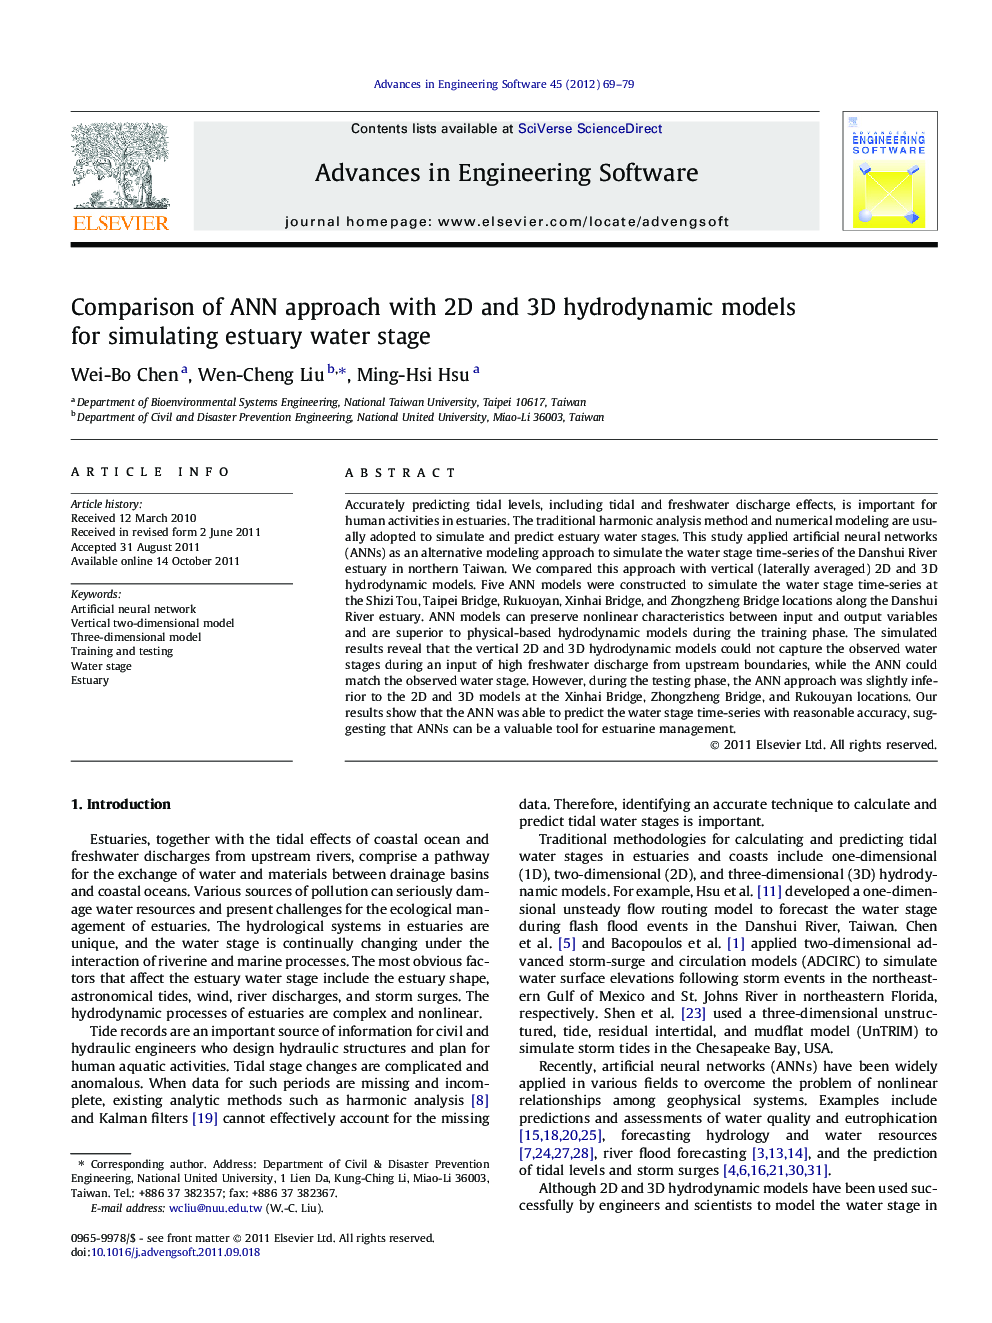 Comparison of ANN approach with 2D and 3D hydrodynamic models for simulating estuary water stage